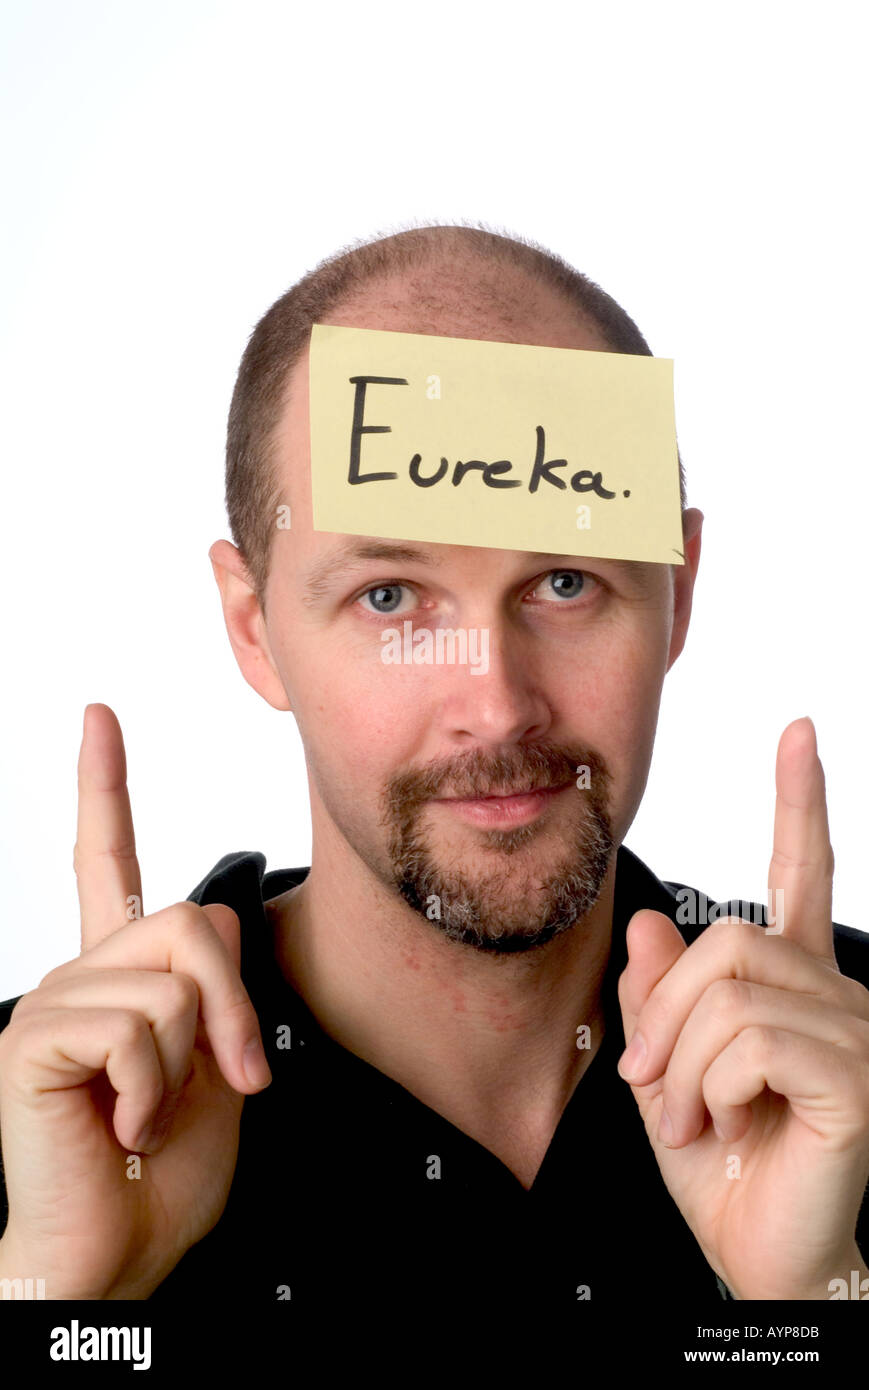 man with post it note on head man with post it note on head idea thought think invention eureka blue sky idea mind clever idea Stock Photo